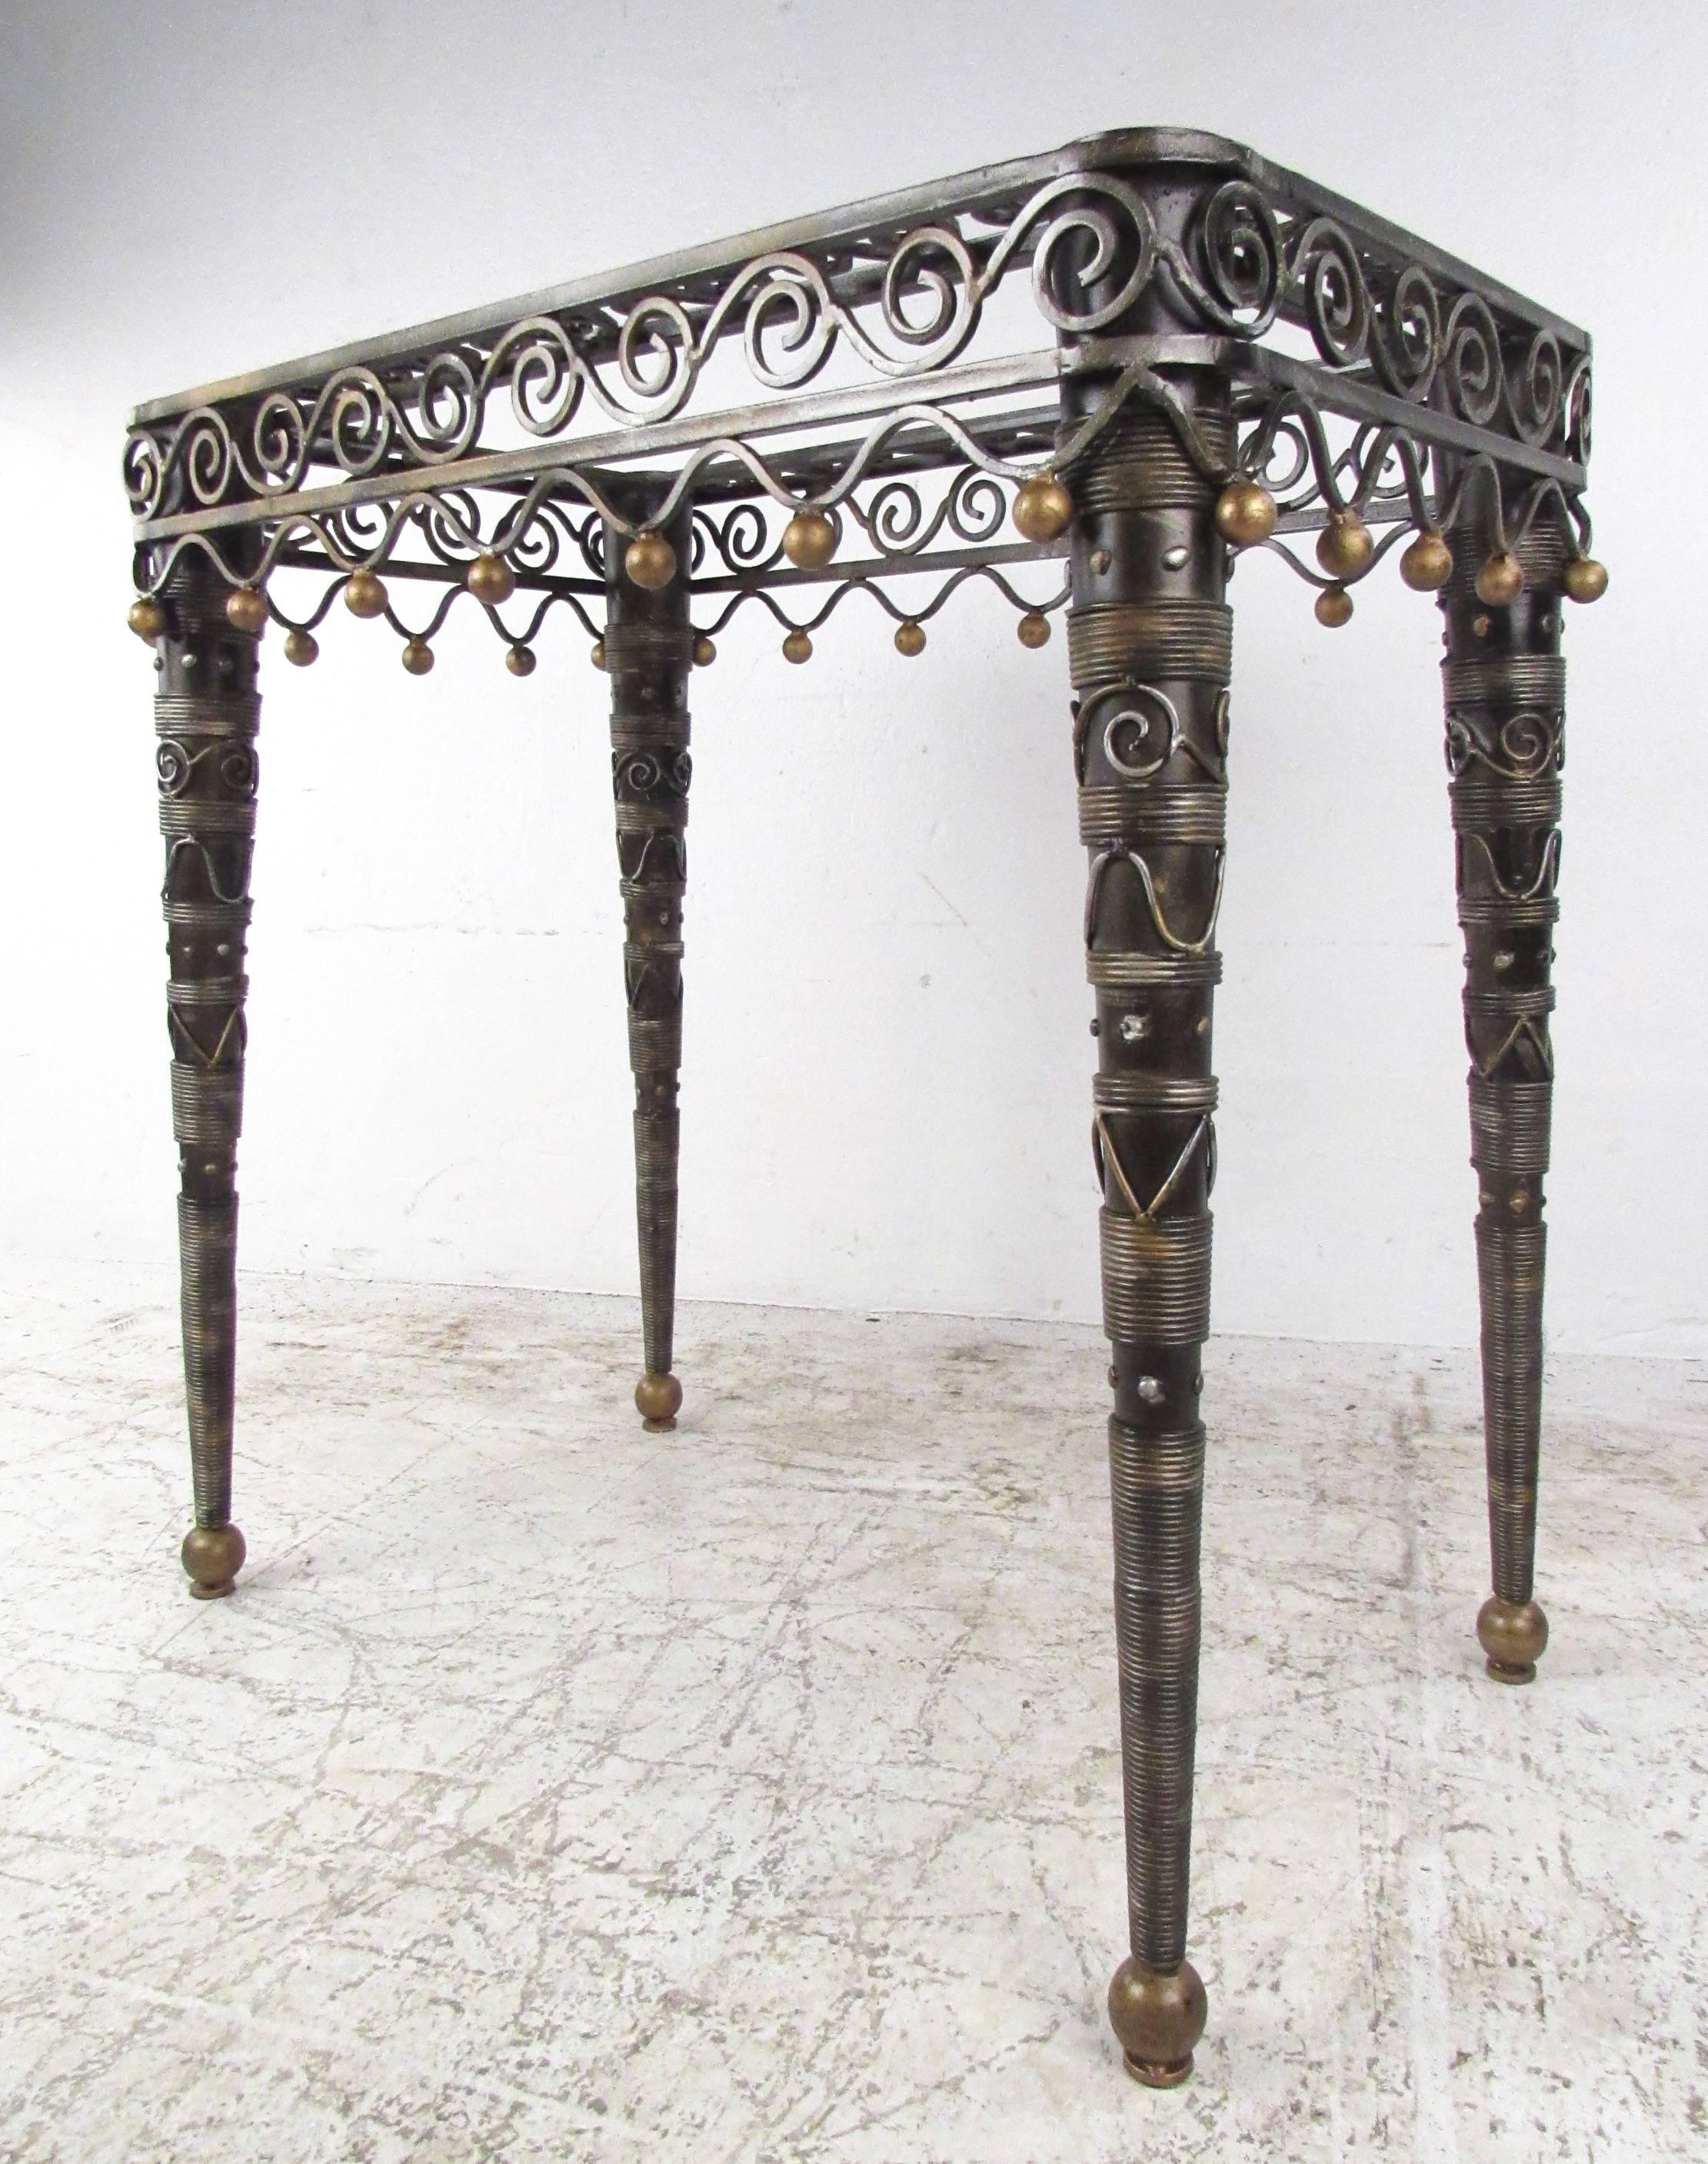 This sculpted metal side table features unique decorative design points with tapered legs, painted brass accents, and woven wire details. Perfect height for sofa side table, lamp table, or for use as an impressive accent table. Please confirm item